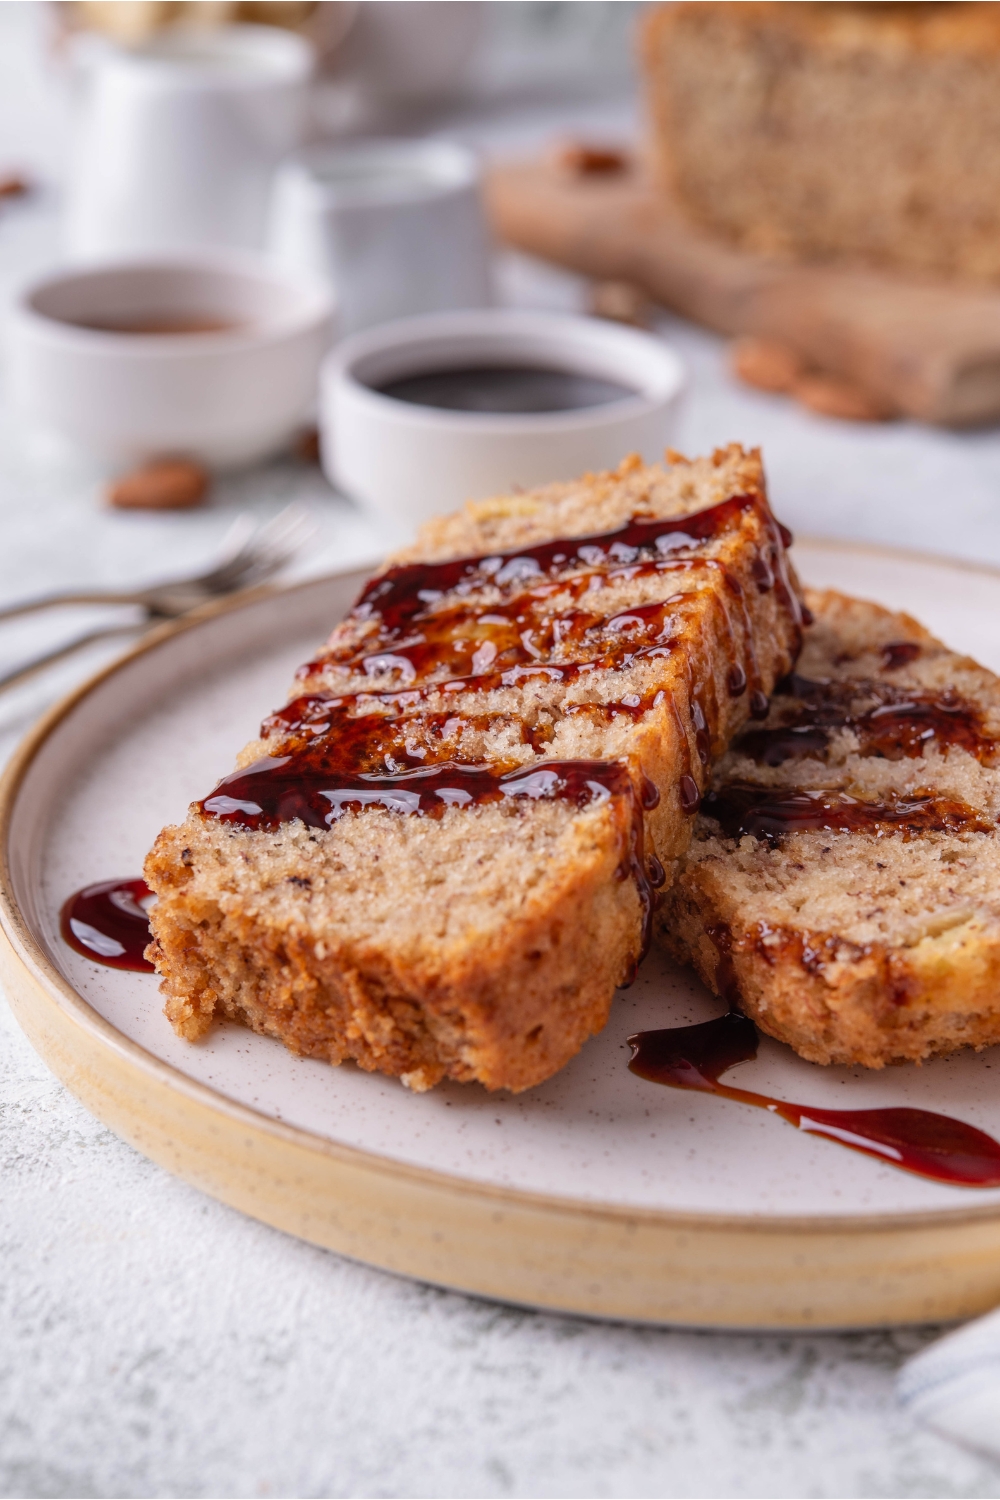 Two slices of banana bread overlapping each other on a plate, both with a drizzle of dark jam on top.